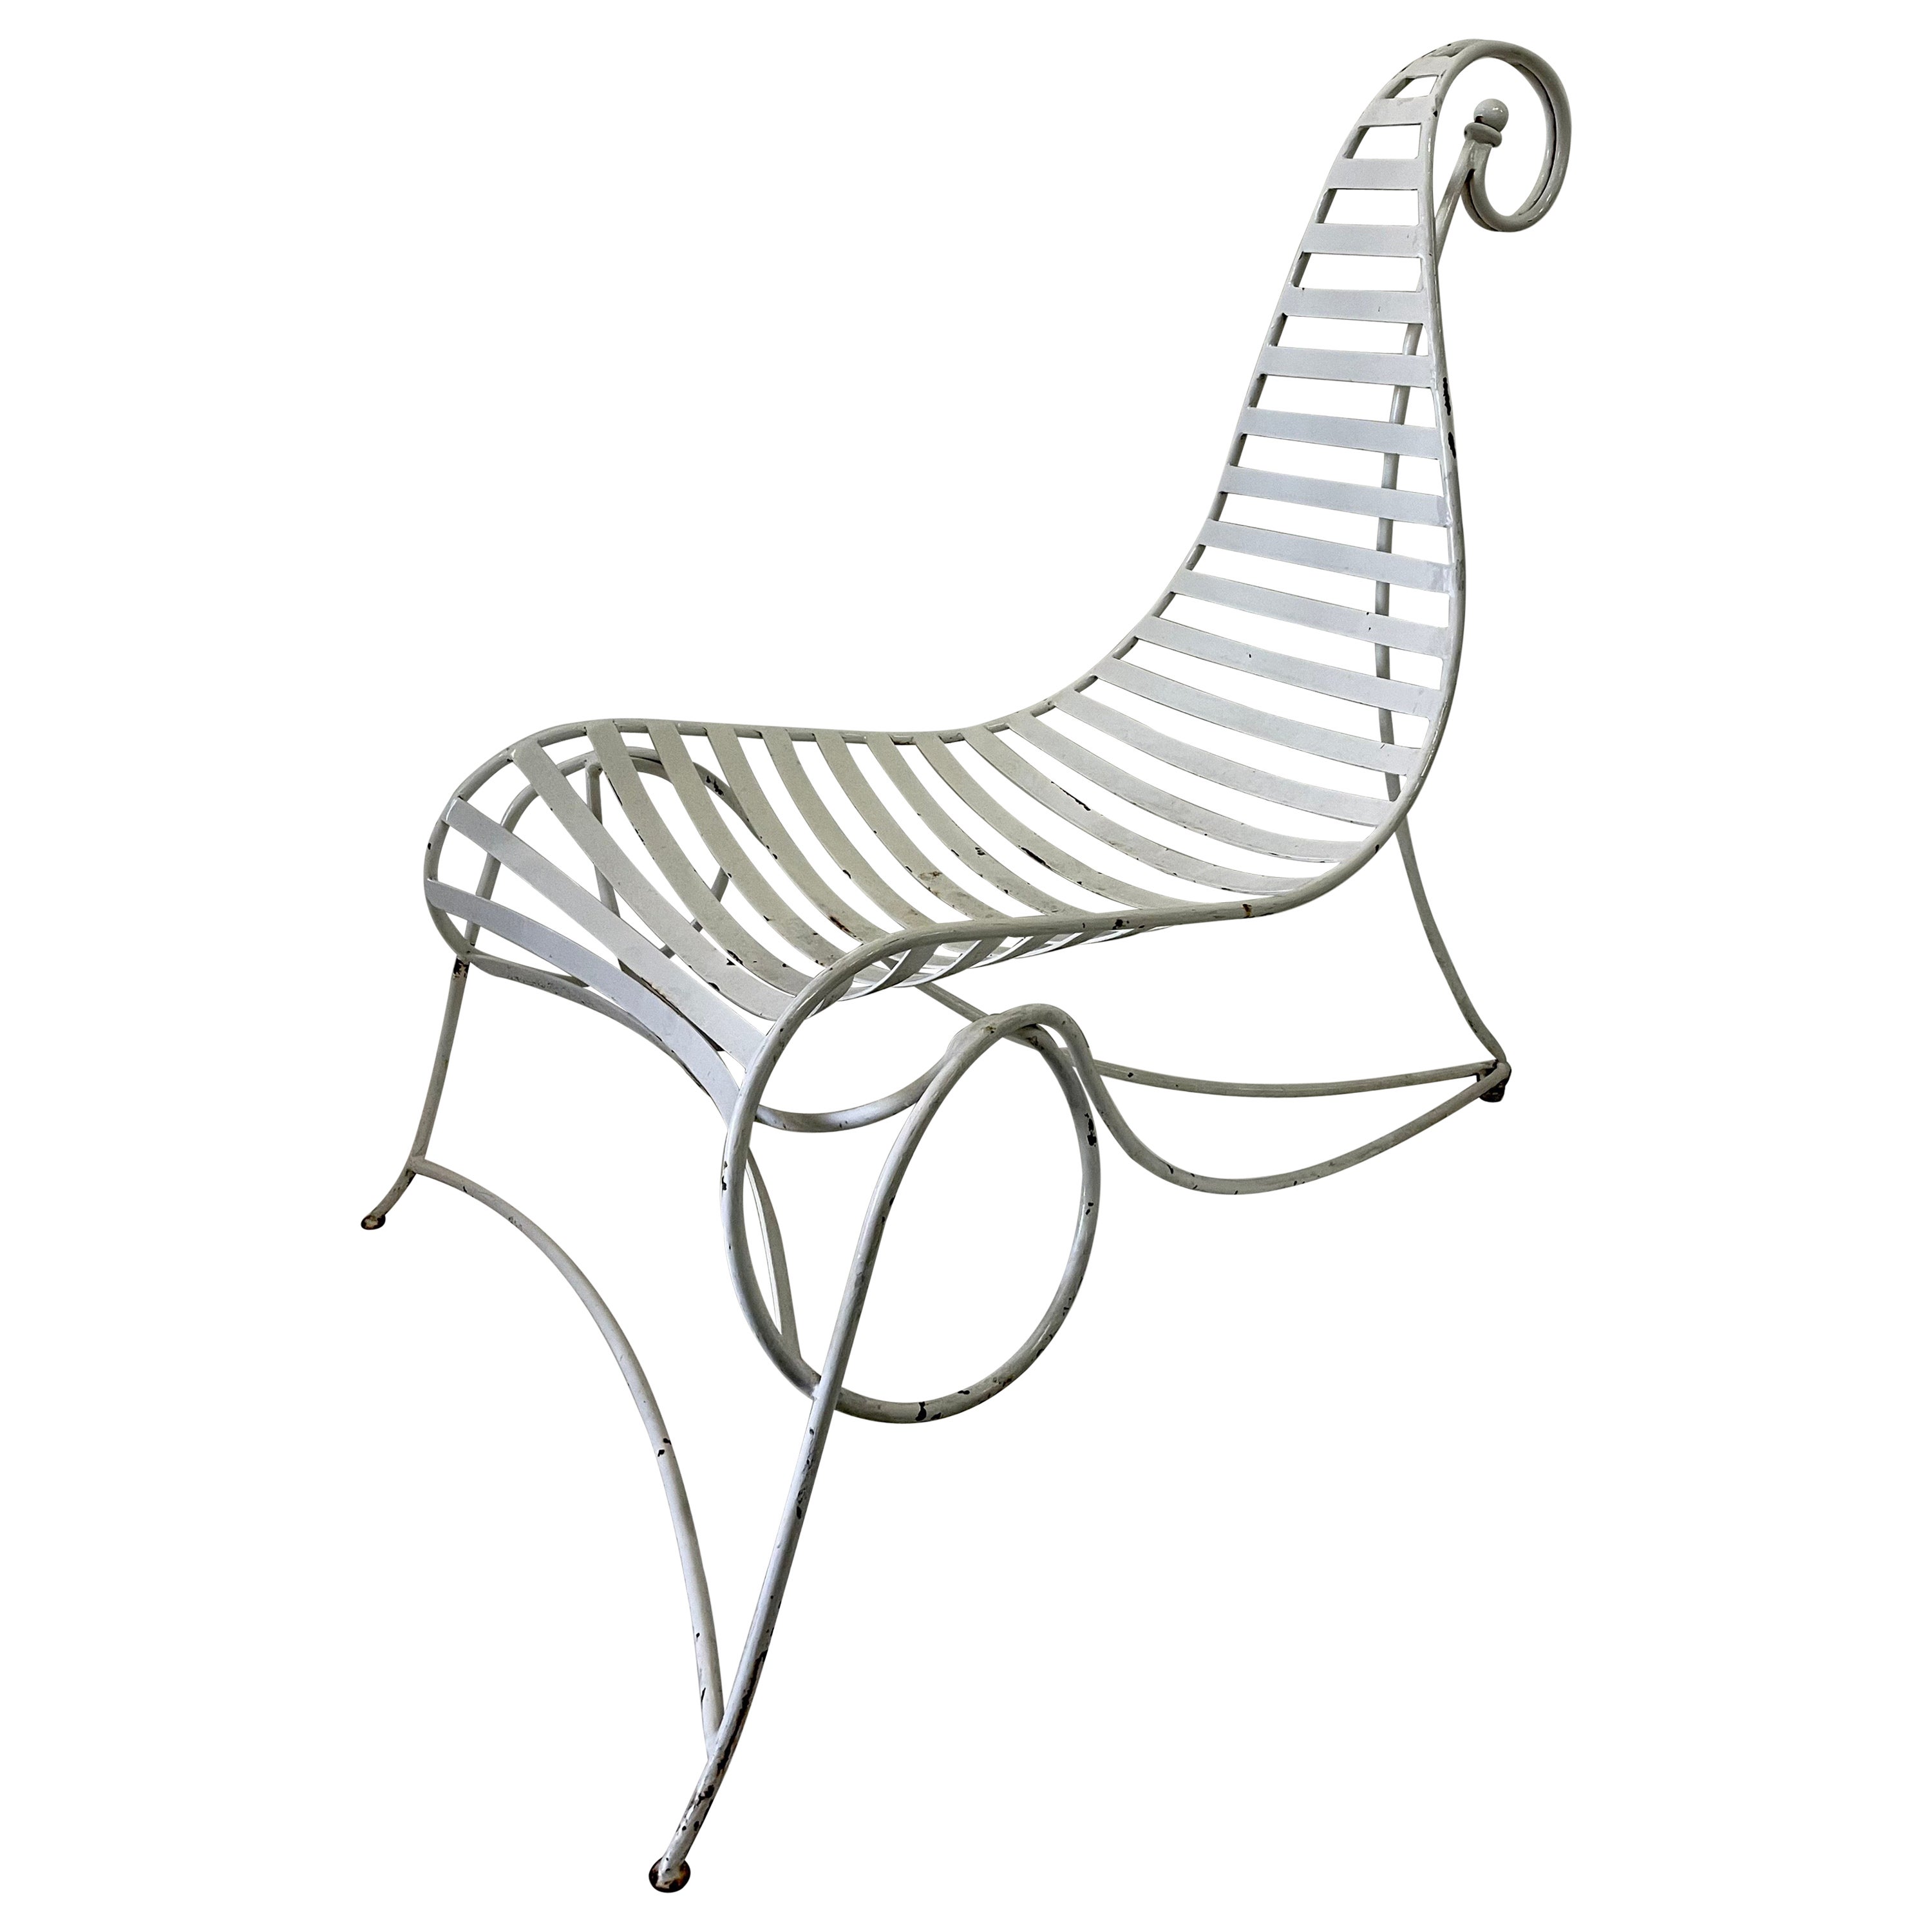 Chair in the Style of the Spine Chair after André Dubreuil